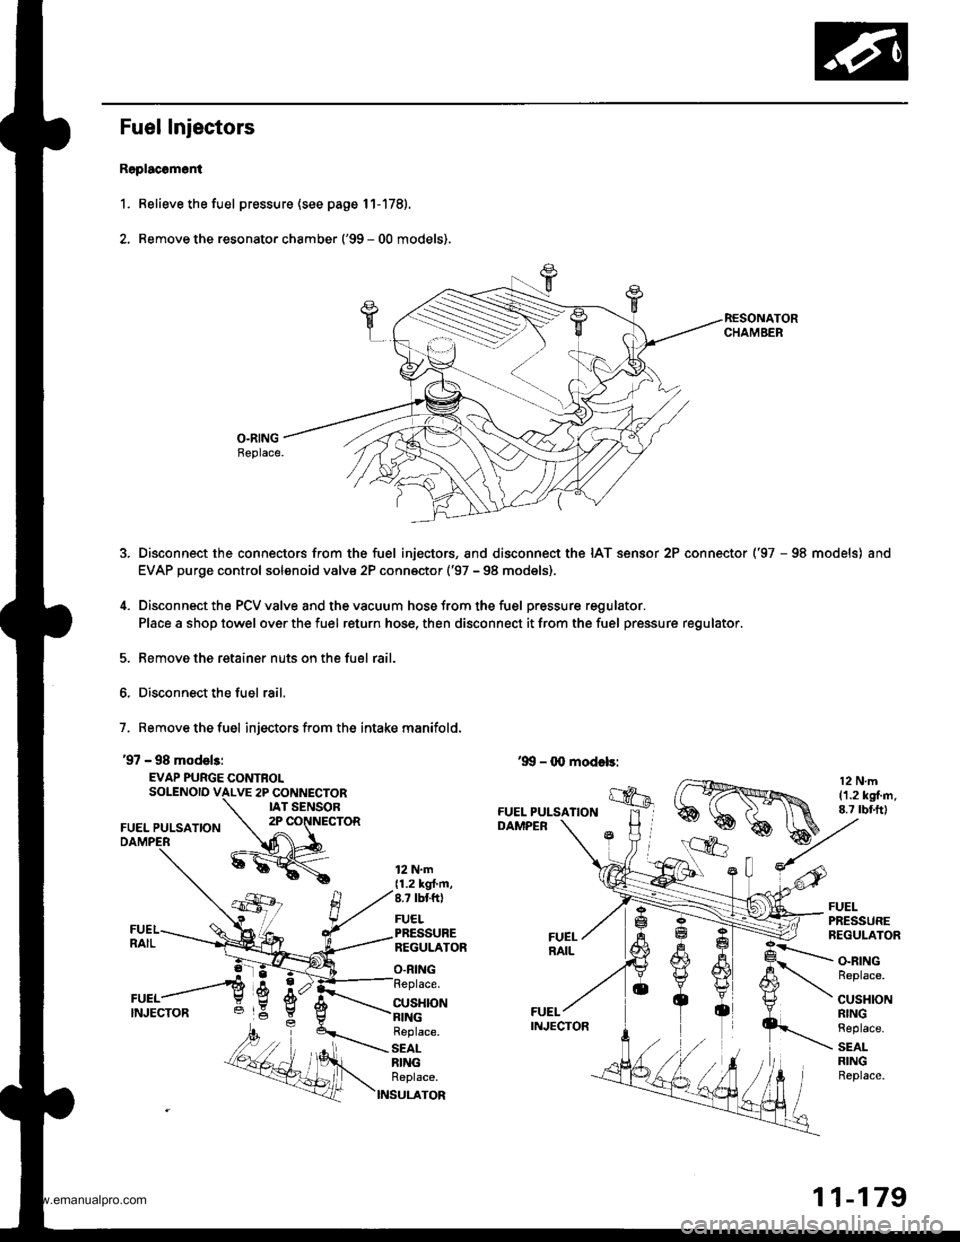 HONDA CR-V 1999 RD1-RD3 / 1.G User Guide 
Fuel Injectors
R6placomoni
1. Relieve the fuel pressure (see page 11-178).
2. Remove the resonato. chamber (99 - 00 models).
O.RINGBeplace.
Disconnect the connectors from the fuel injectors, and dis